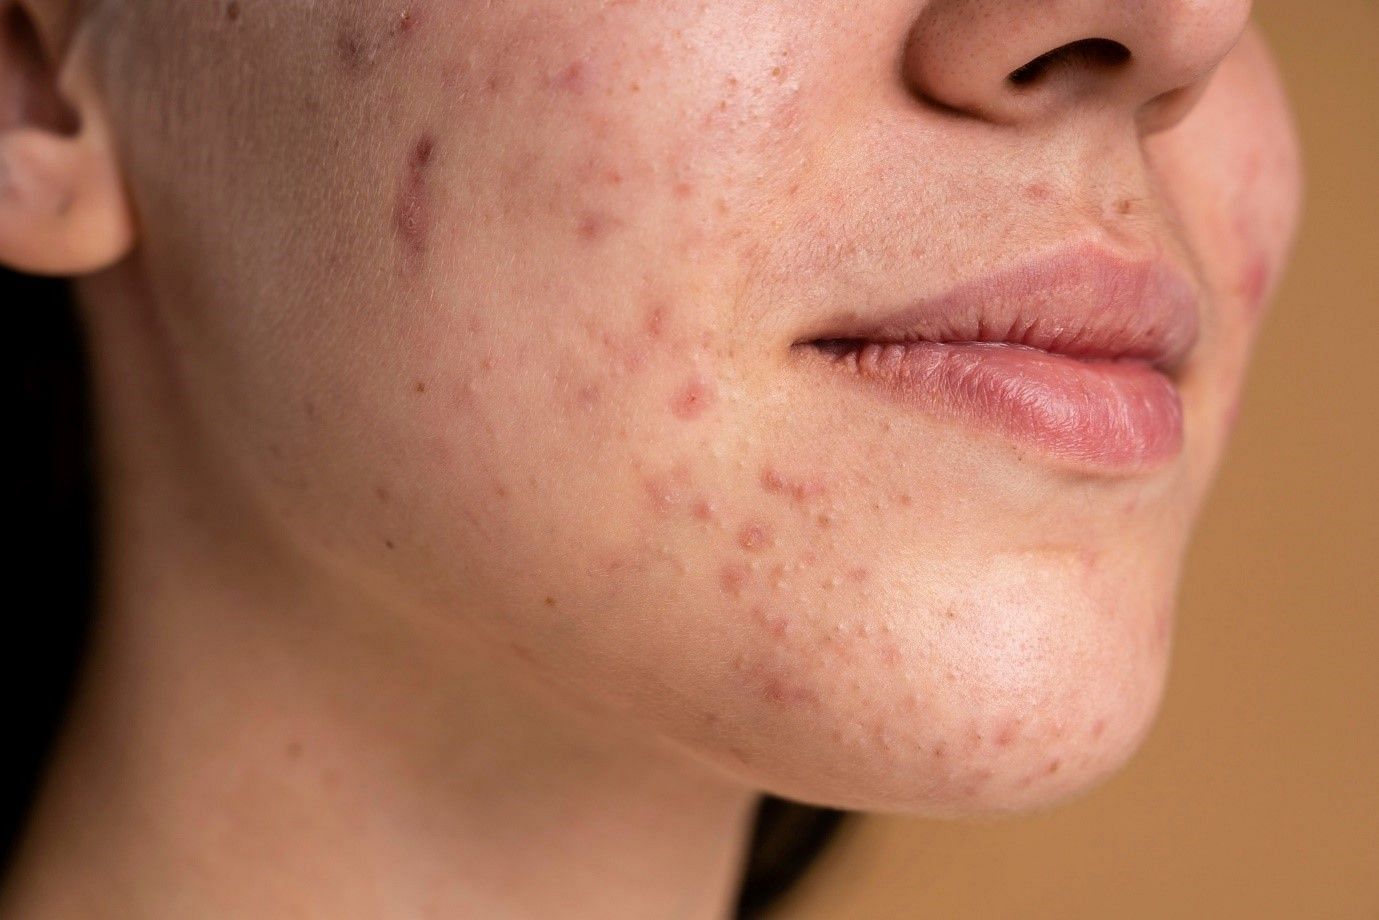 Thyme can help removal of acne (Image by Freepik)